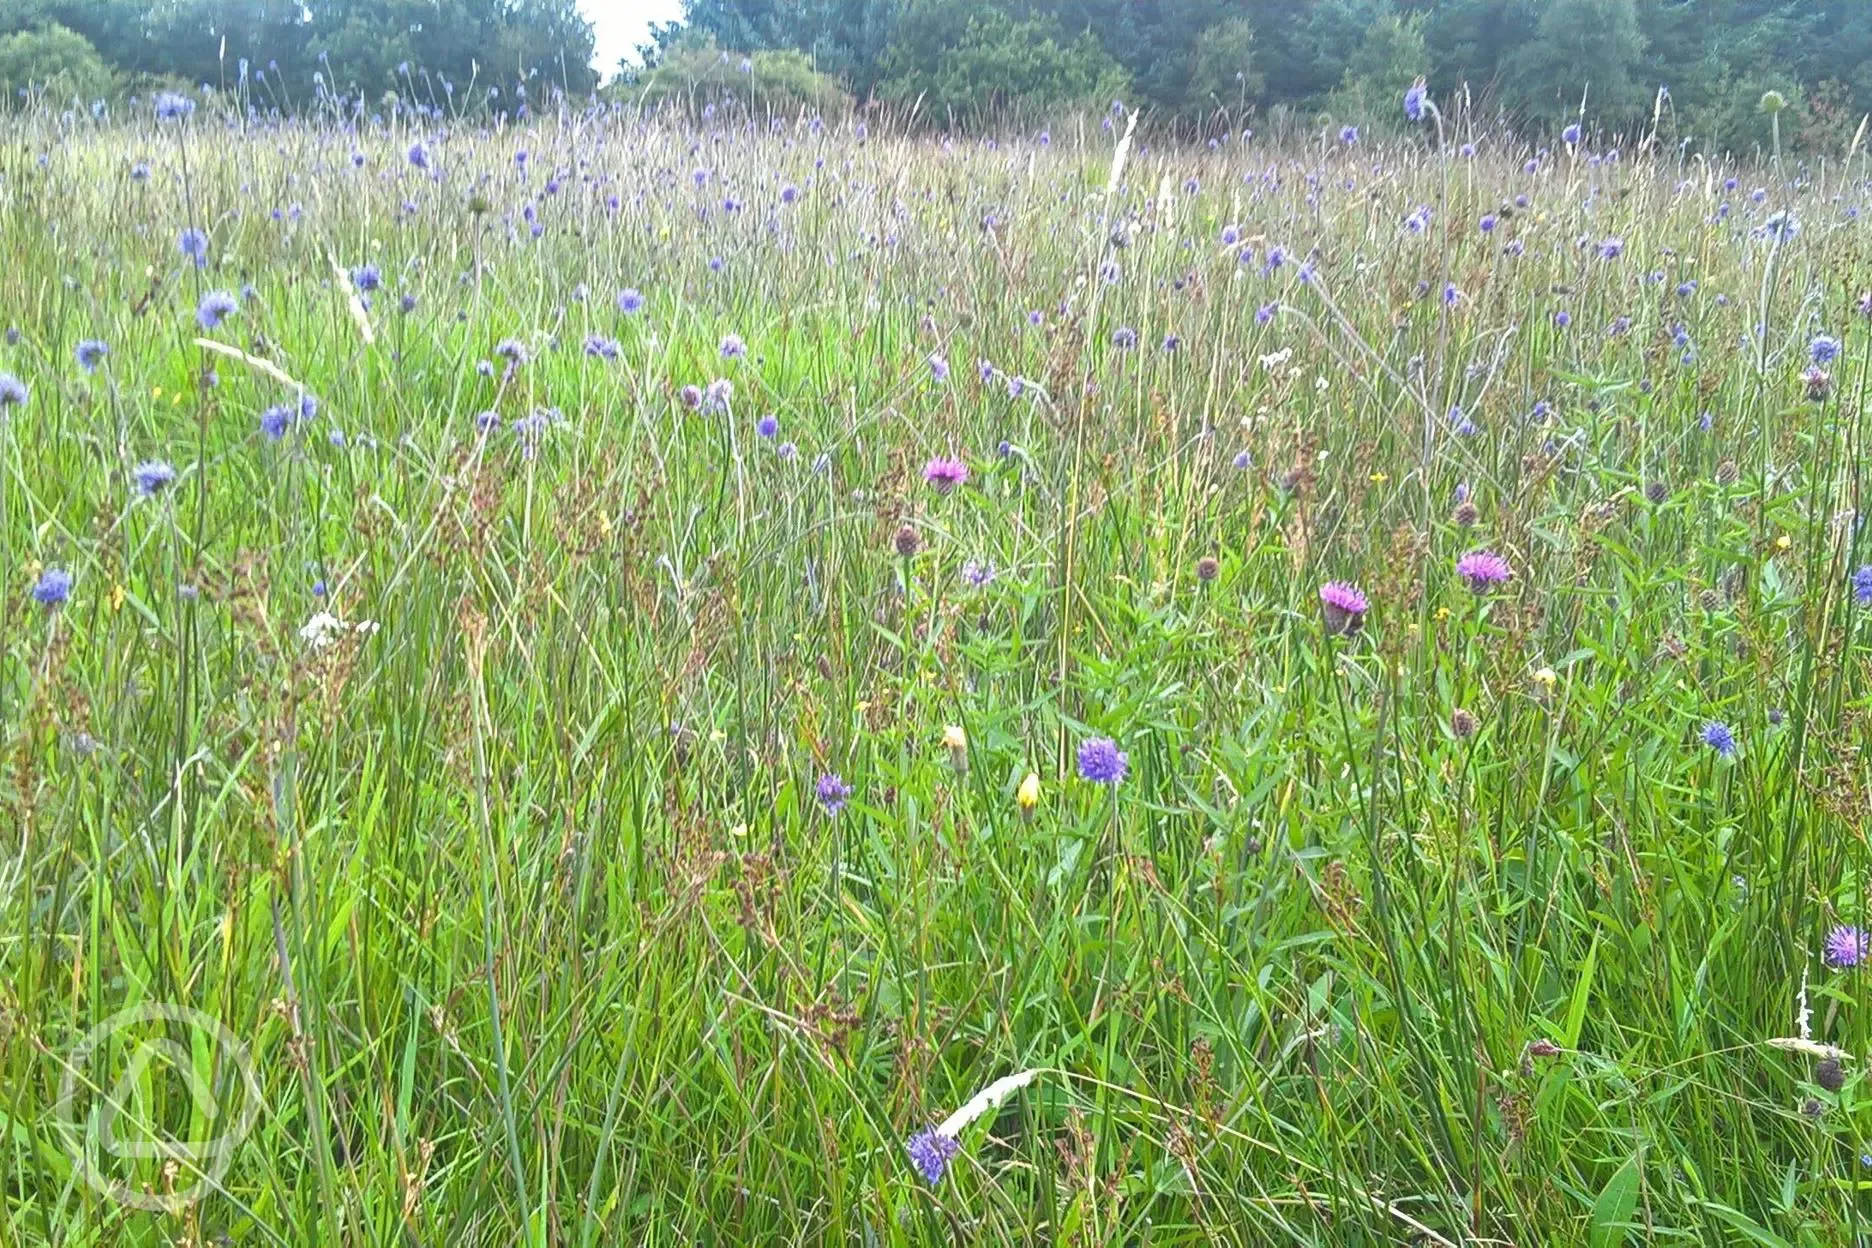 The meadows are managed for wild flowers